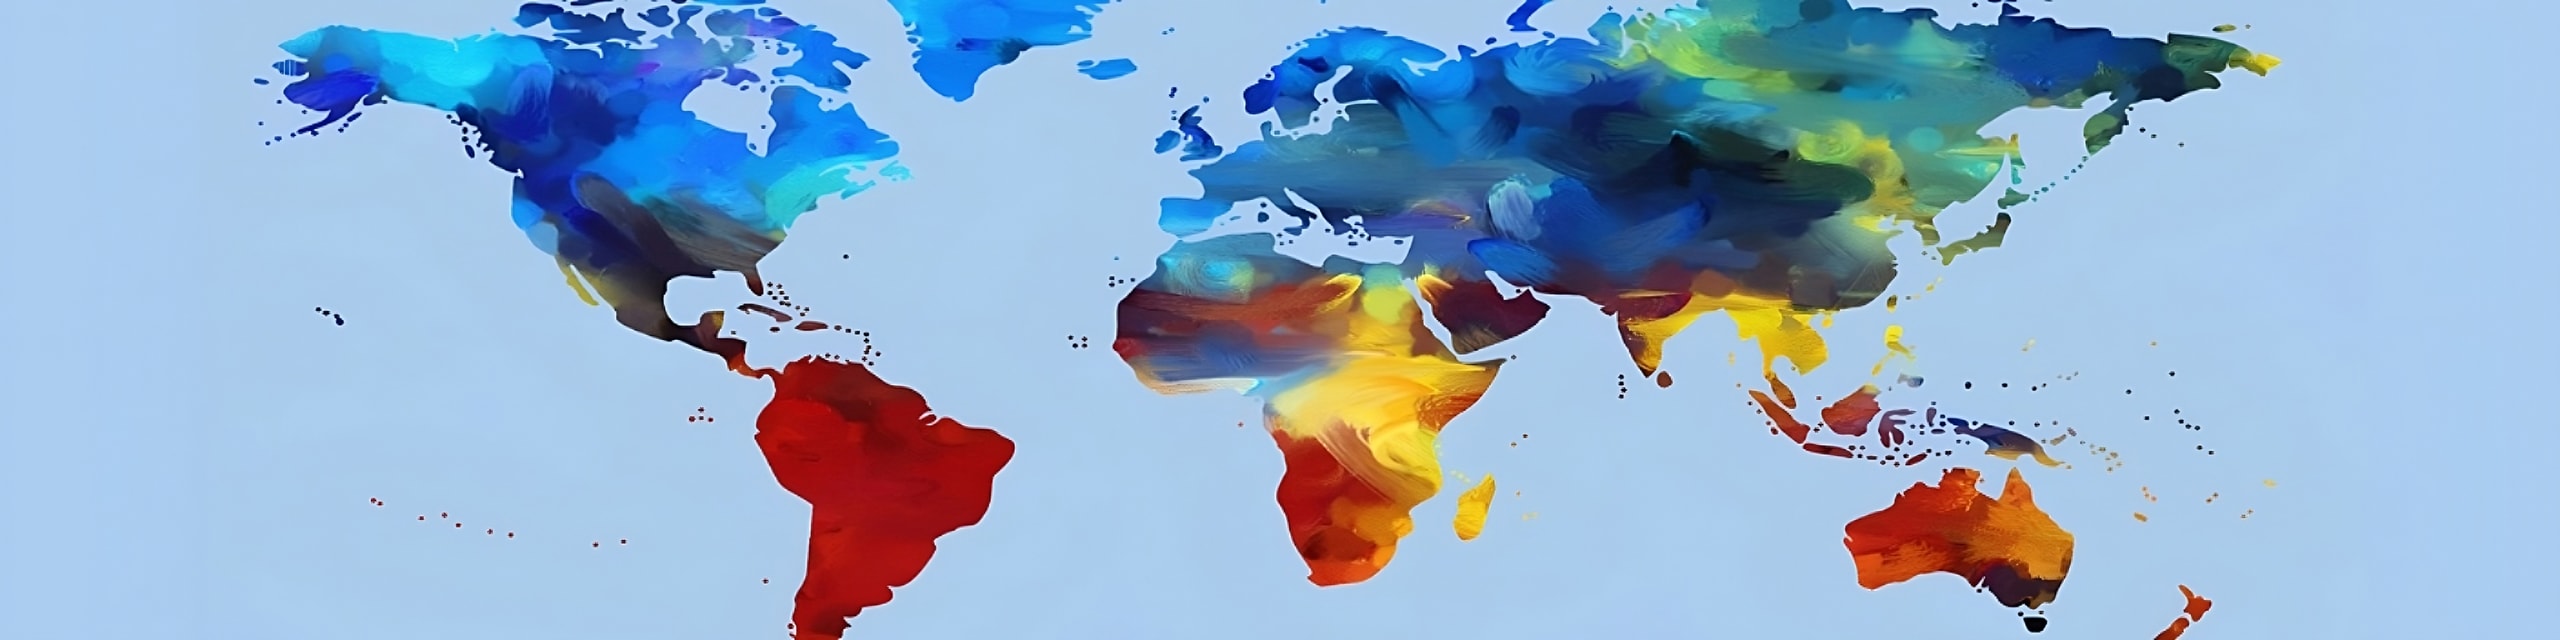 Colorful, artistic rendition of a world map